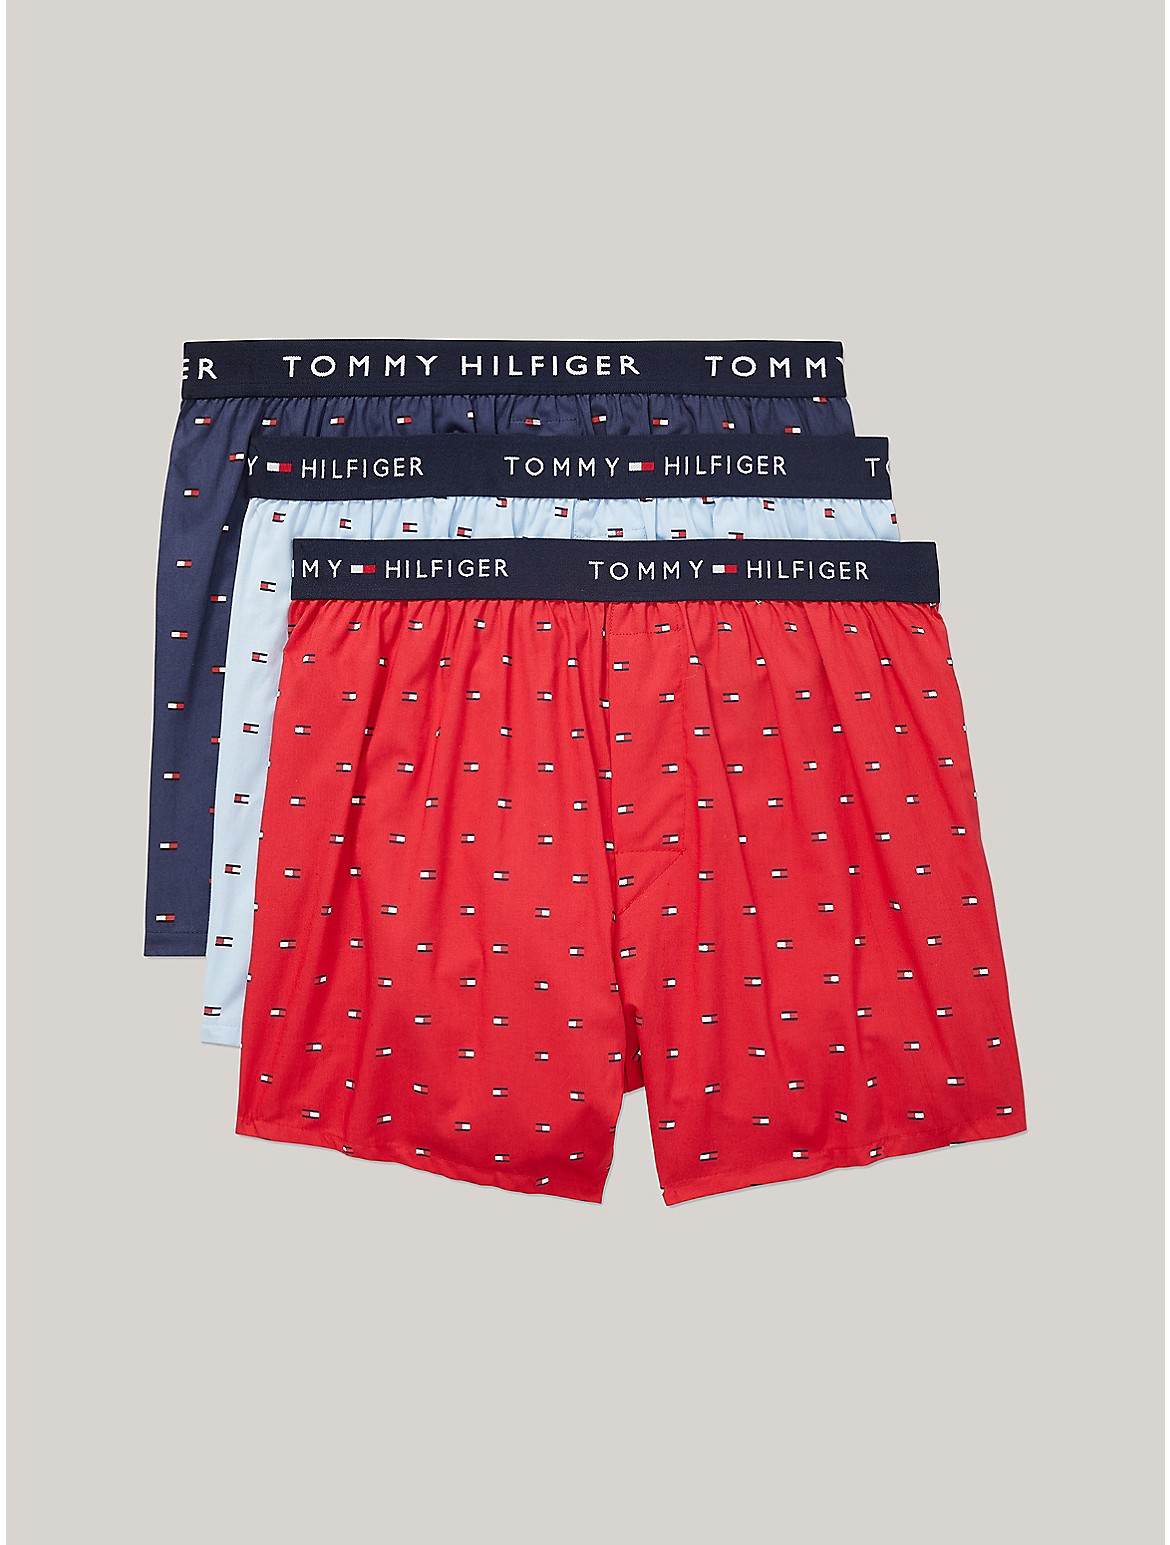 Tommy Hilfiger Cotton Classics Slim Fit Woven Boxer 3pk In Medium Red